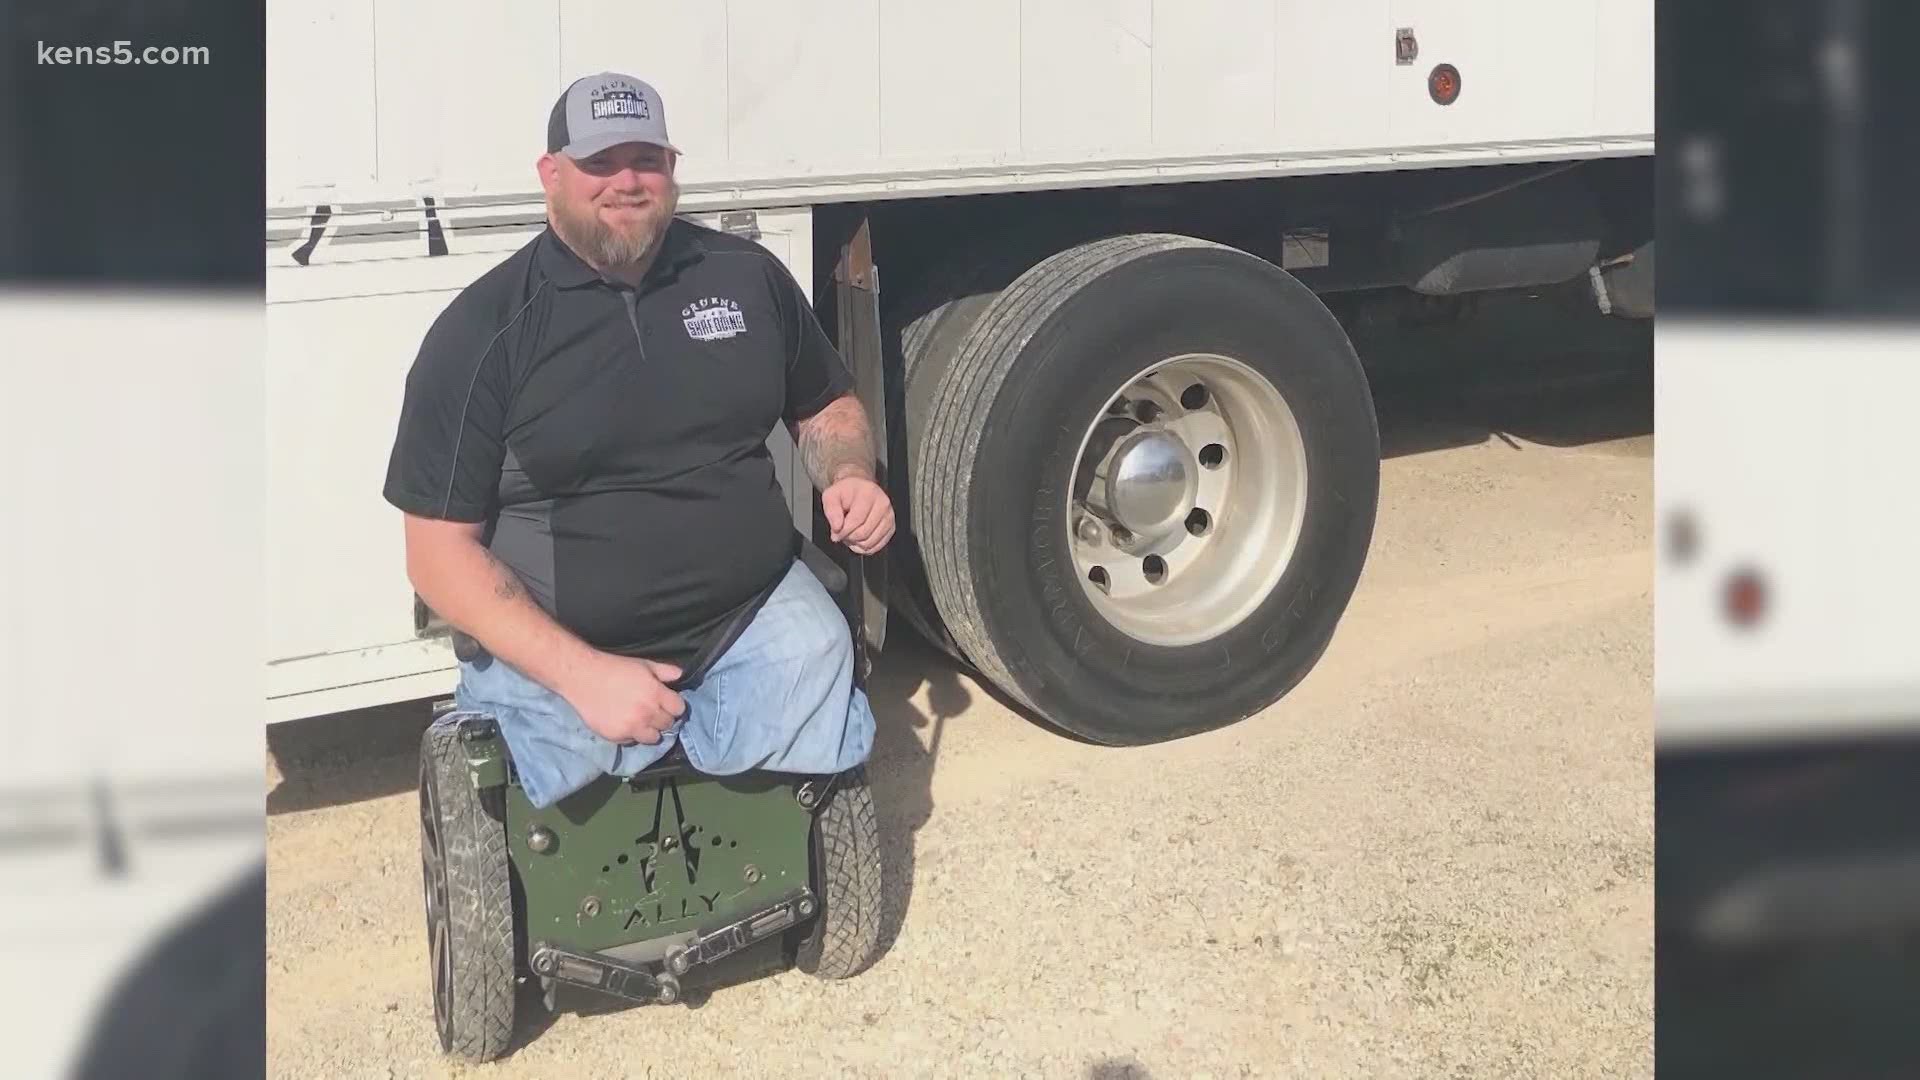 A double-amputee and San Antonio veteran said he needed help finding his custom wheelchair, which he believed fell off his truck while he was driving.